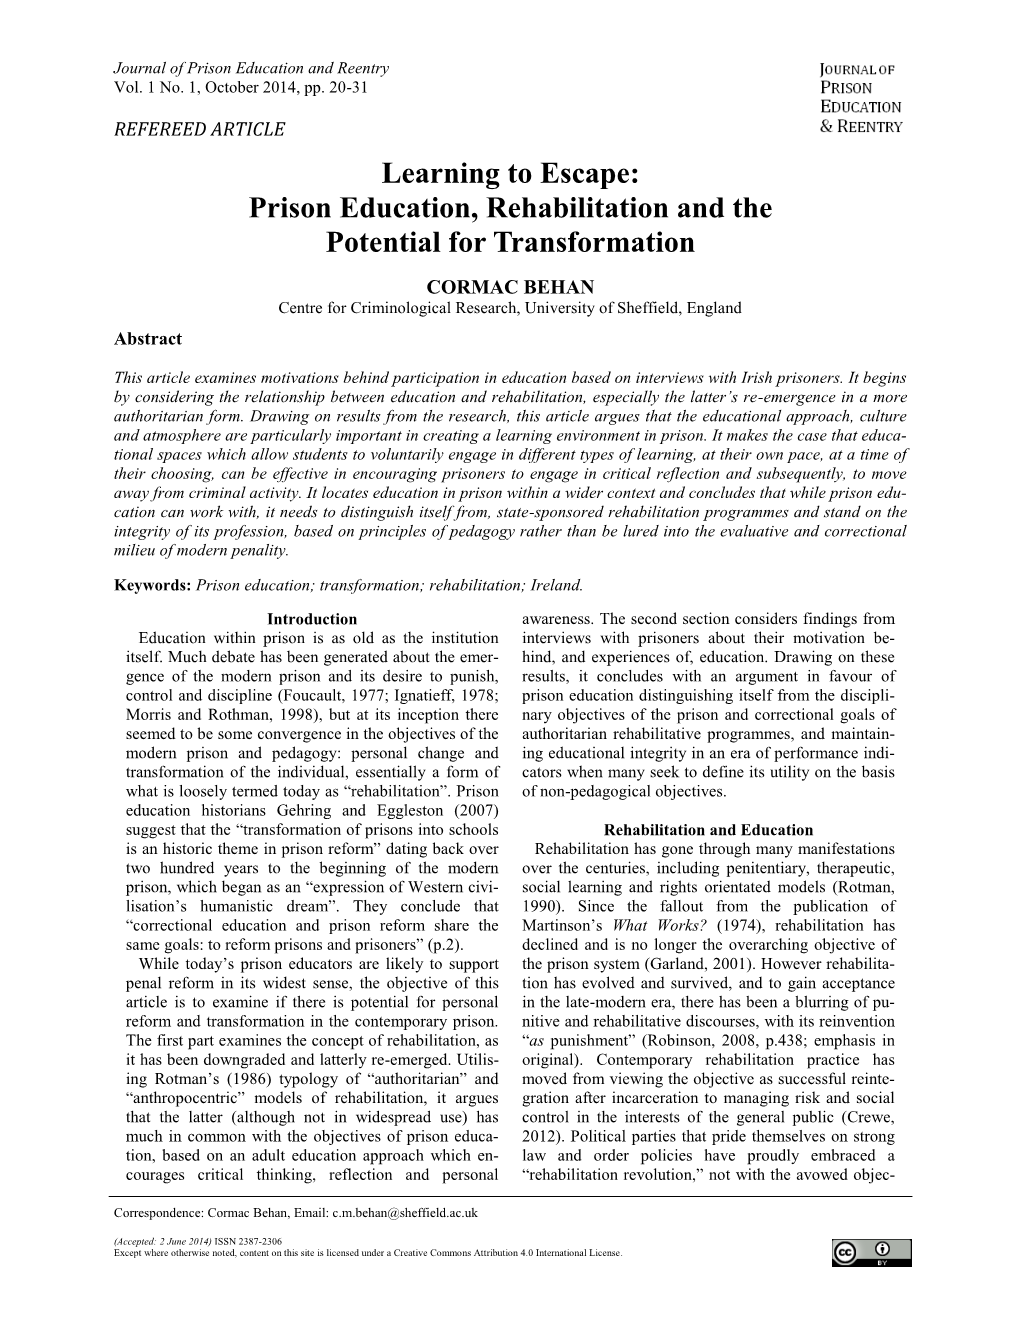 Prison Education, Rehabilitation and the Potential for Transformation CORMAC BEHAN Centre for Criminological Research, University of Sheffield, England Abstract